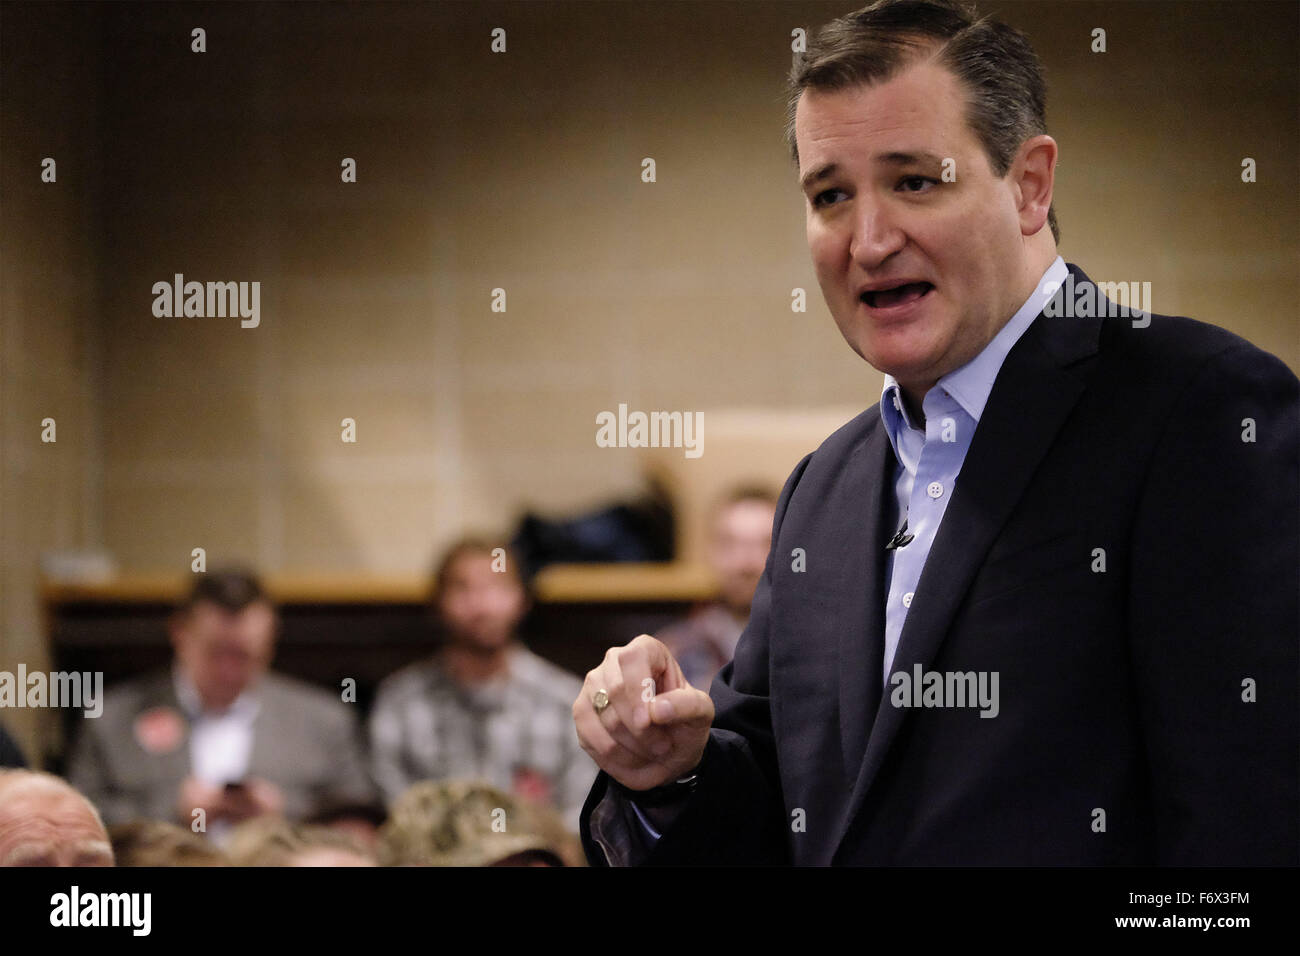 Sioux City, IOWA, USA. 20th Nov, 2015. U.S. Sen. TED CRUZ (R-TX) campaigns in Sioux City, Iowa Friday, November 20, 2015, at Briar Cliff University, a private Catholic school. Cruz said when Pres. Obama insults him, he is also insulting the American people like those attending his town hall meeting. © Jerry Mennenga/ZUMA Wire/Alamy Live News Stock Photo